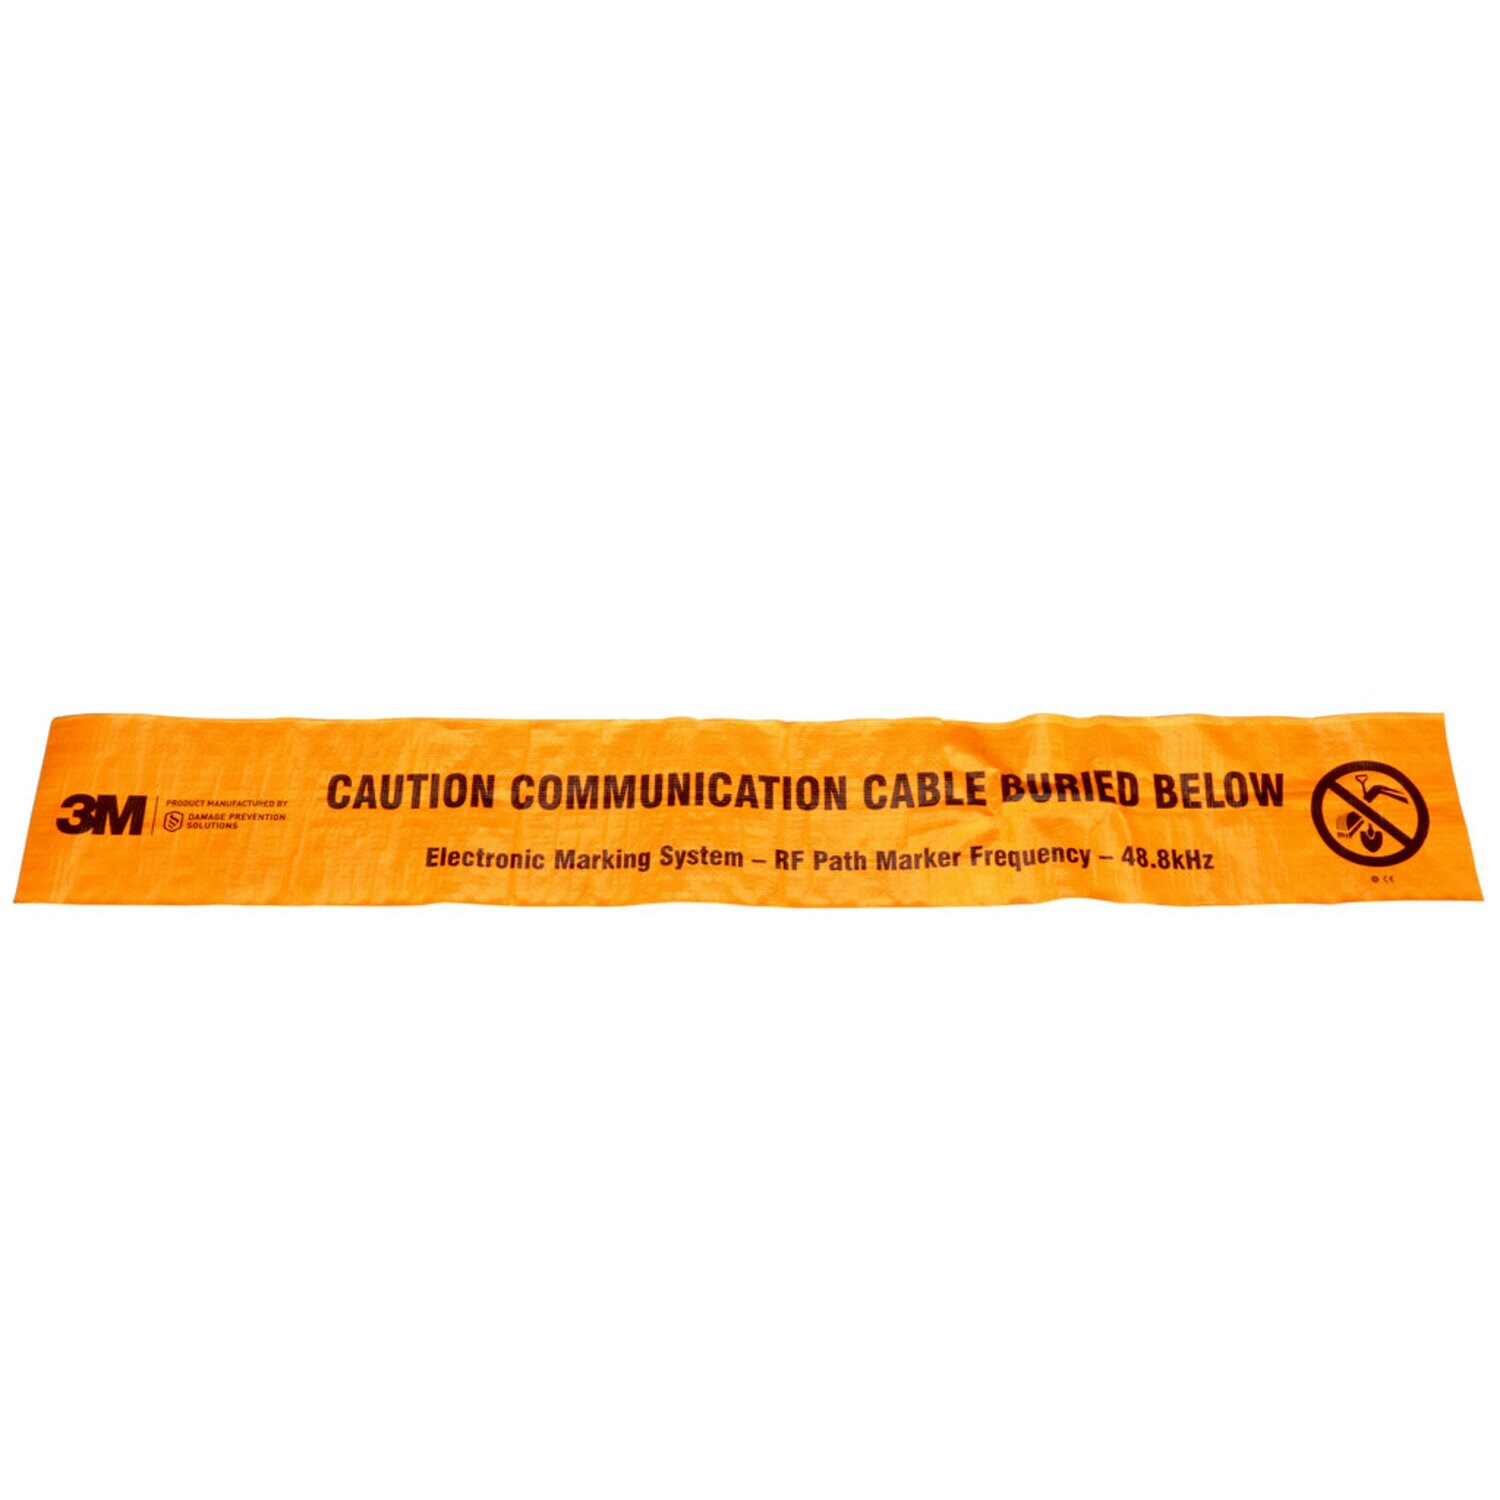 7100254241 - 3M Electronic Marking System (EMS) Caution Tape 7901, Orange, 6 in, Telco, 500 ft, 1 Box/Case